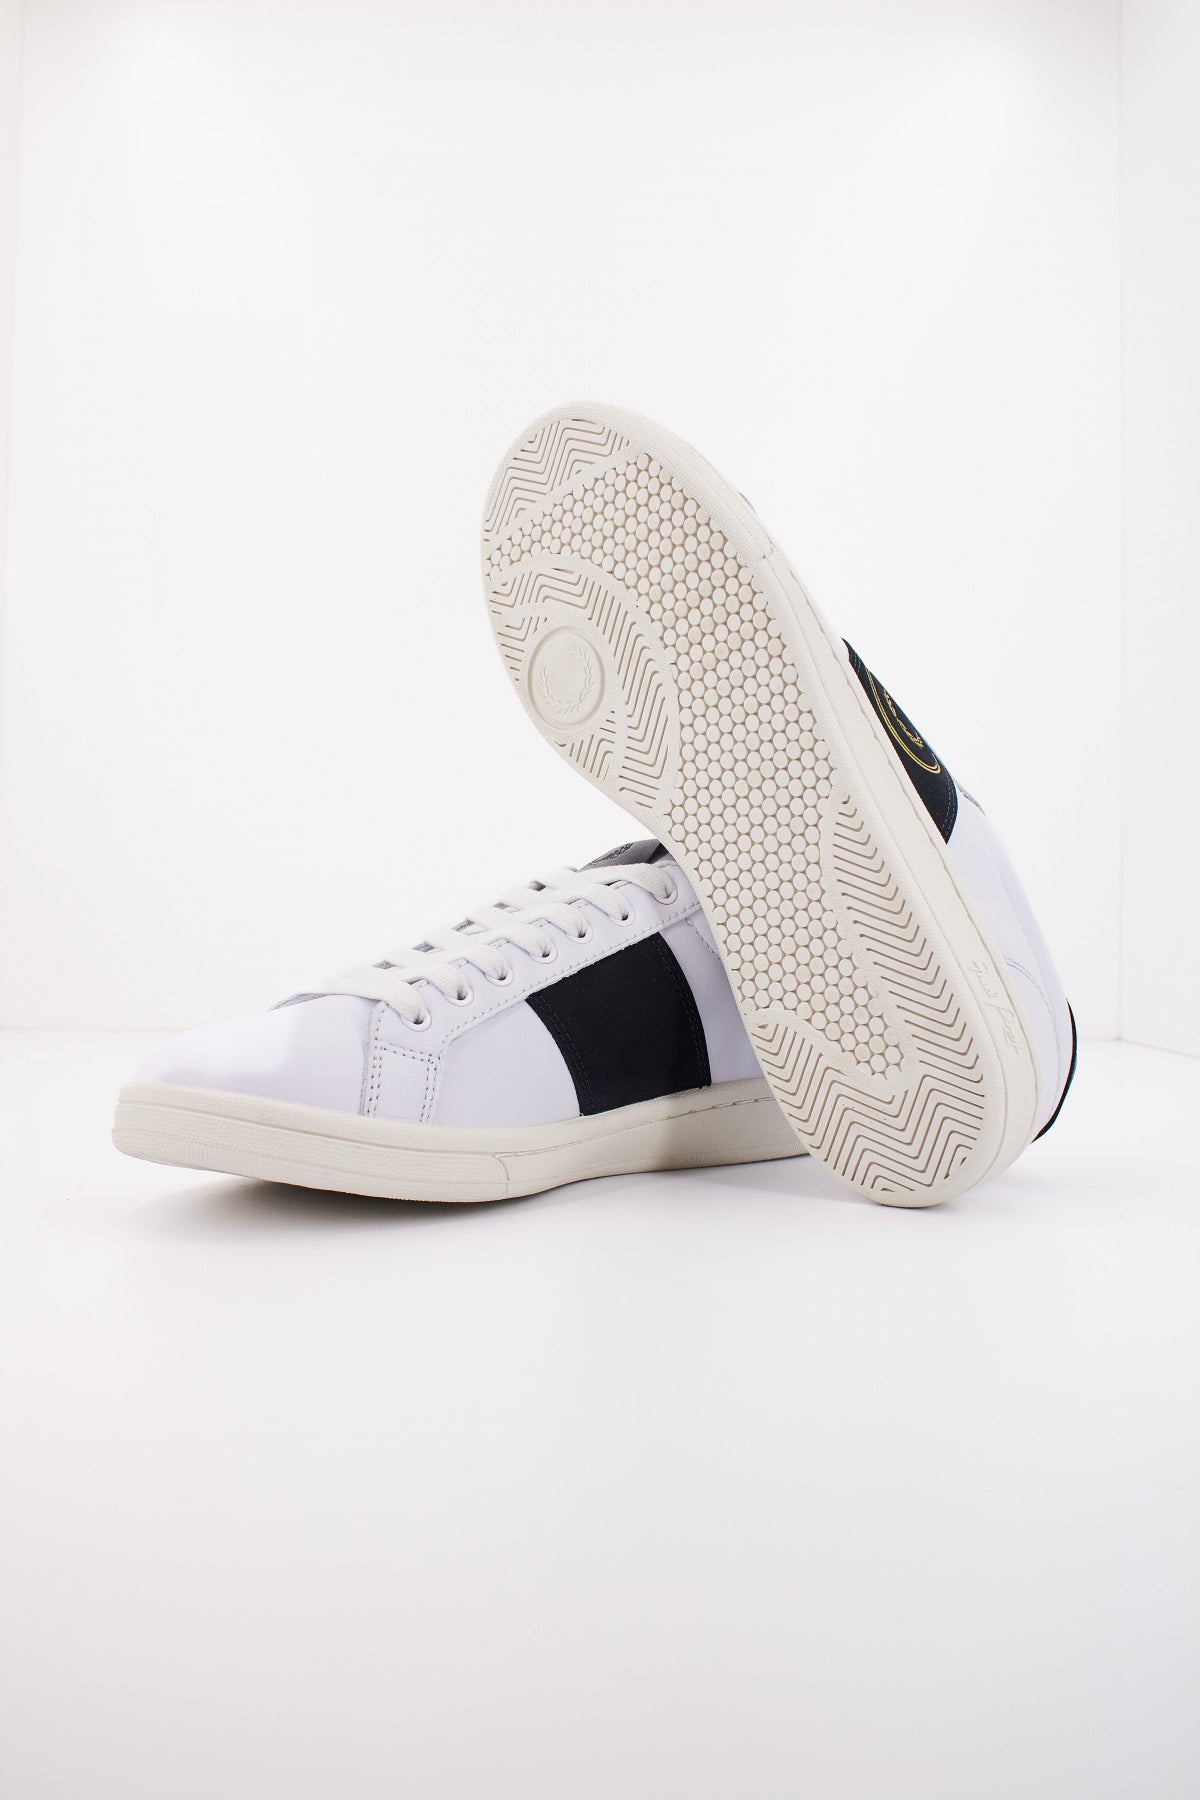 FRED PERRY B LEATHER/BRANDE en color BLANCO  (4)